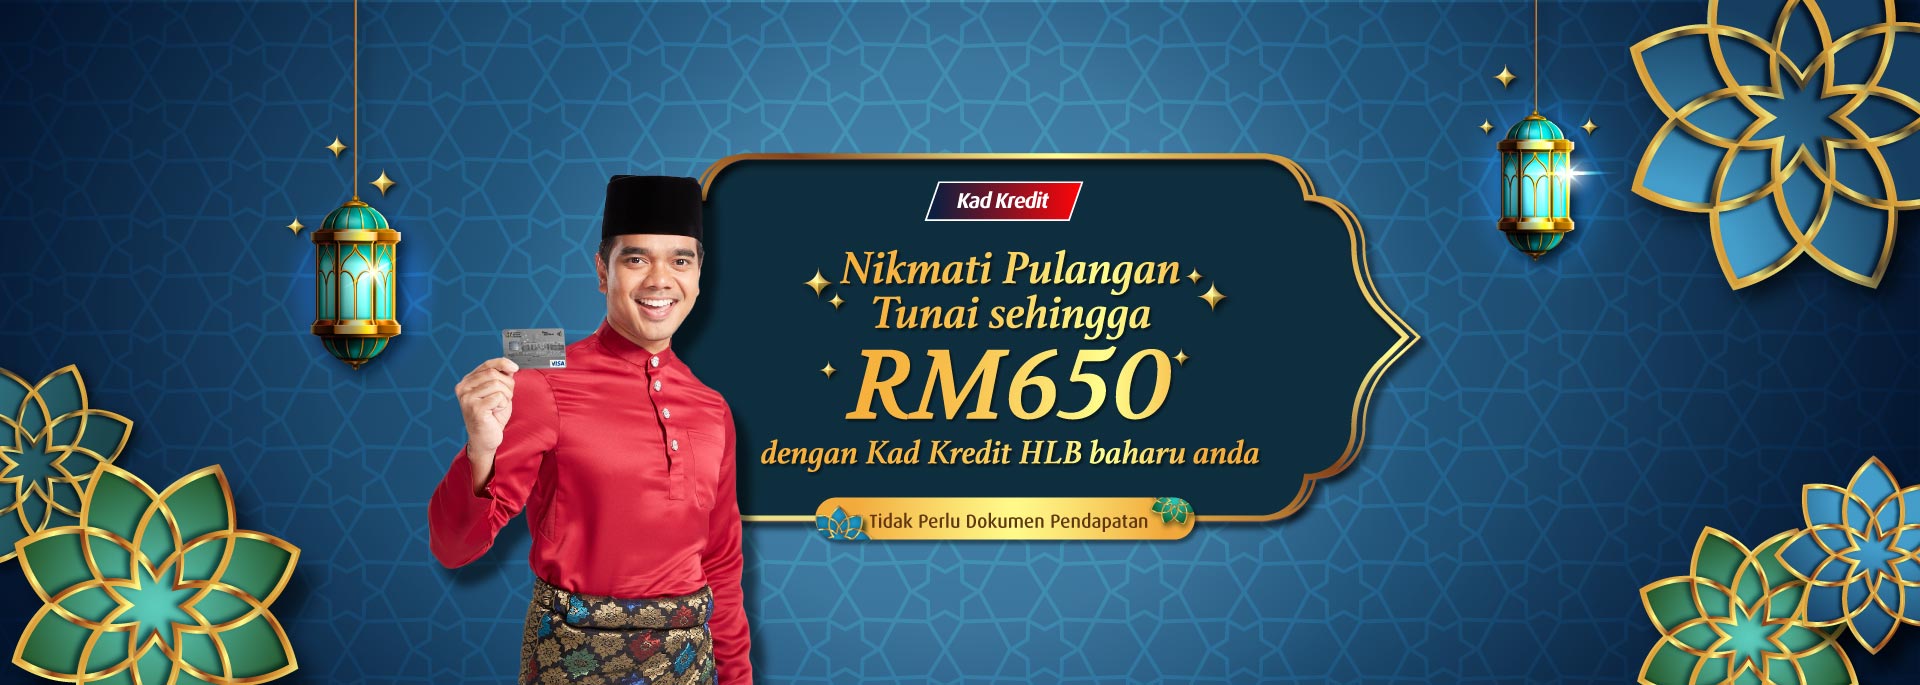 Get up to RM650 cashback with your new HLB Credit Card